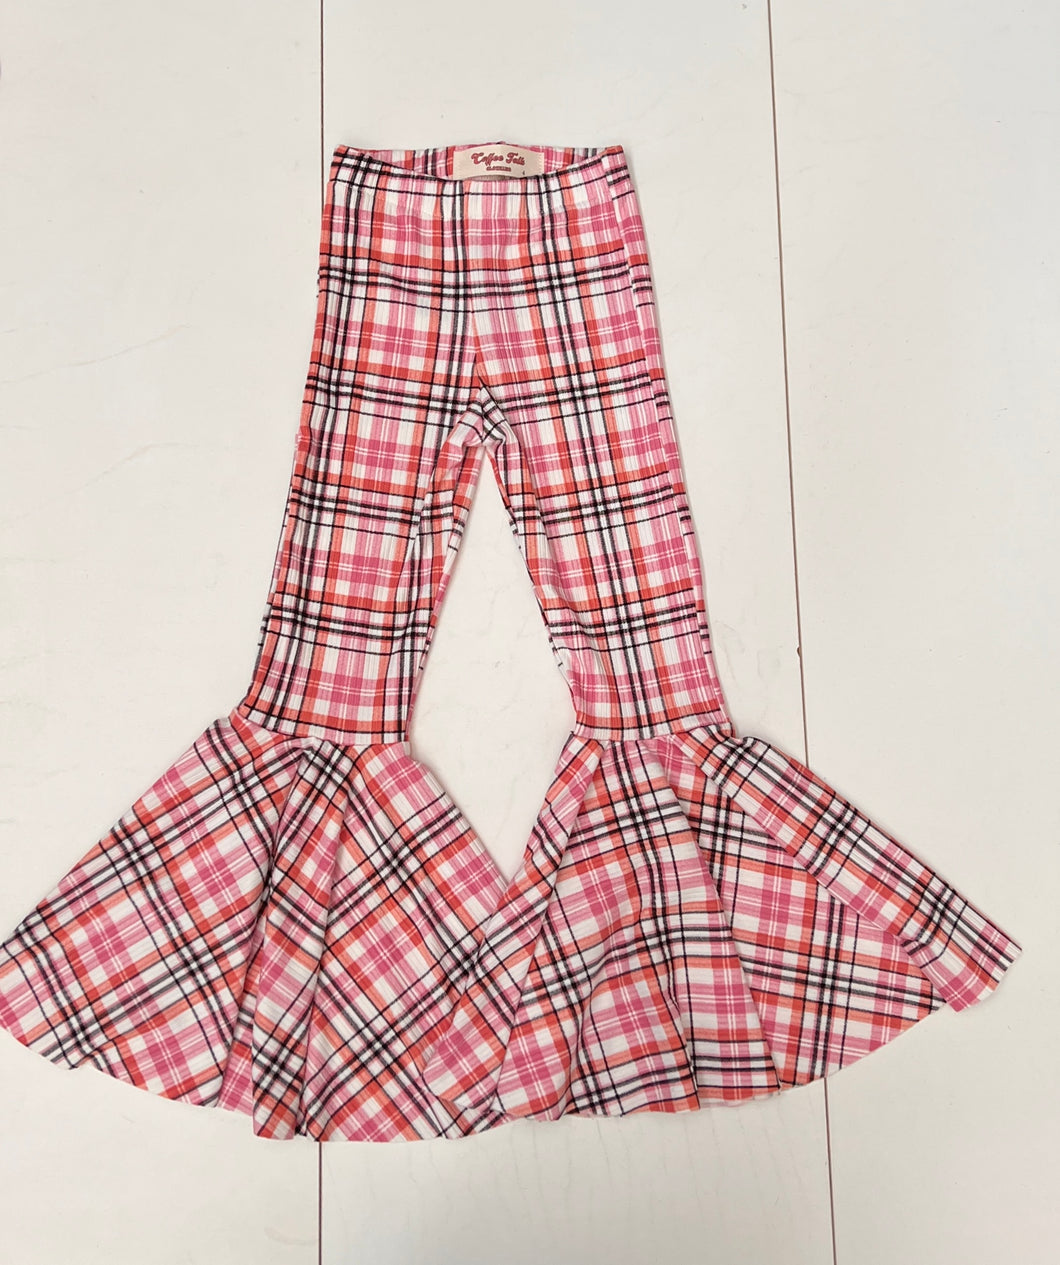 Girls Bell Bottoms in Pink Melon Plaid Print